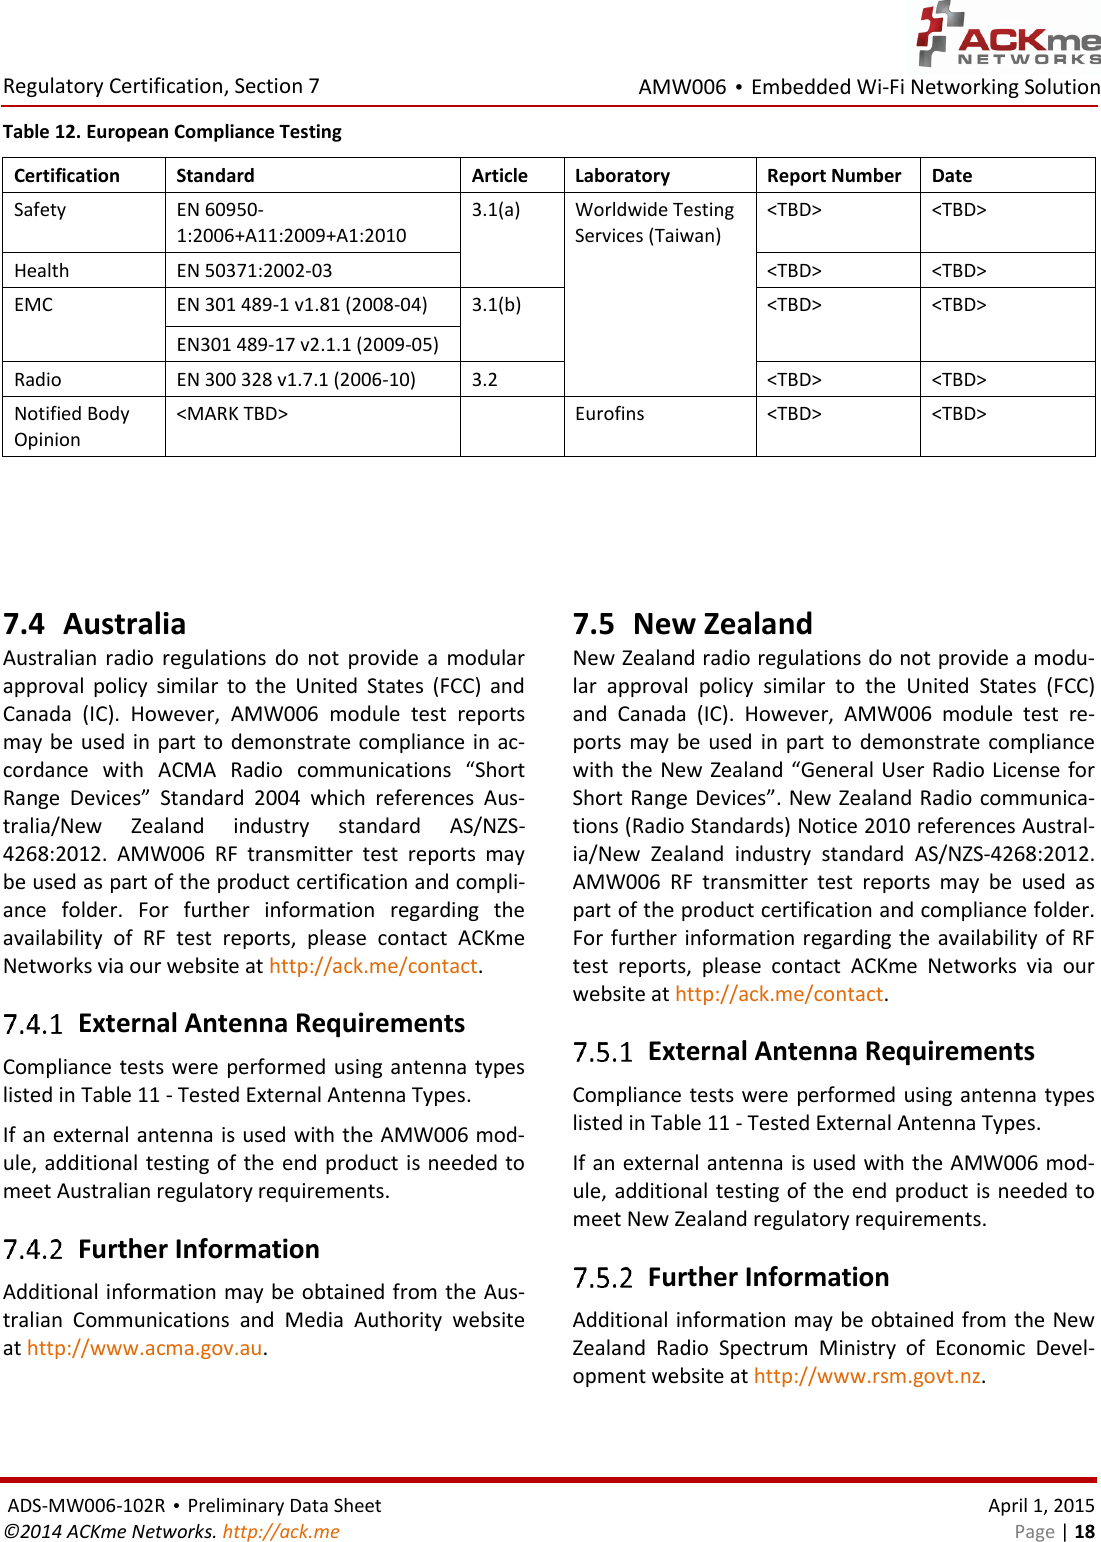 AMW006 • Embedded Wi-Fi Networking Solution  Regulatory Certification, Section 7  ADS-MW006-102R • Preliminary Data Sheet    April 1, 2015 ©2014 ACKme Networks. http://ack.me    Page | 18 Table 12. European Compliance Testing Certification Standard Article Laboratory Report Number Date Safety EN 60950-1:2006+A11:2009+A1:2010 3.1(a)  Worldwide Testing Services (Taiwan) &lt;TBD&gt; &lt;TBD&gt; Health EN 50371:2002-03 &lt;TBD&gt; &lt;TBD&gt; EMC EN 301 489-1 v1.81 (2008-04) 3.1(b) &lt;TBD&gt; &lt;TBD&gt; EN301 489-17 v2.1.1 (2009-05) Radio EN 300 328 v1.7.1 (2006-10) 3.2 &lt;TBD&gt; &lt;TBD&gt; Notified Body Opinion &lt;MARK TBD&gt;  Eurofins &lt;TBD&gt; &lt;TBD&gt;    7.4 Australia Australian  radio  regulations  do  not  provide  a  modular approval  policy  similar  to  the  United  States  (FCC)  and Canada  (IC).  However,  AMW006  module  test  reports may be used in  part to demonstrate compliance in ac-cordance  with  ACMA  Radio  communications  “Short Range  Devices”  Standard  2004  which  references  Aus-tralia/New  Zealand  industry  standard  AS/NZS-4268:2012.  AMW006  RF  transmitter  test  reports  may be used as part of the product certification and compli-ance  folder.  For  further  information  regarding  the availability  of  RF  test  reports,  please  contact  ACKme Networks via our website at http://ack.me/contact.  External Antenna Requirements Compliance tests were performed using antenna types listed in Table 11 - Tested External Antenna Types. If an external antenna is used with the AMW006 mod-ule, additional testing of the end product is needed to meet Australian regulatory requirements.  Further Information Additional information may be obtained from the Aus-tralian  Communications  and  Media  Authority  website at http://www.acma.gov.au. 7.5 New Zealand New Zealand radio regulations do not provide a modu-lar  approval  policy  similar  to  the  United  States  (FCC) and  Canada  (IC).  However,  AMW006  module  test  re-ports  may  be used  in  part  to  demonstrate compliance with the New Zealand “General User Radio License for Short Range Devices”. New Zealand Radio communica-tions (Radio Standards) Notice 2010 references Austral-ia/New  Zealand  industry  standard  AS/NZS-4268:2012. AMW006  RF  transmitter  test  reports  may  be  used  as part of the product certification and compliance folder. For further information regarding the availability of RF test  reports,  please  contact  ACKme  Networks  via  our website at http://ack.me/contact.  External Antenna Requirements Compliance tests were performed using antenna types listed in Table 11 - Tested External Antenna Types. If an external antenna is used with the AMW006 mod-ule, additional testing of the end product is needed to meet New Zealand regulatory requirements.  Further Information Additional information may be obtained from the New Zealand  Radio  Spectrum  Ministry  of  Economic  Devel-opment website at http://www.rsm.govt.nz.  